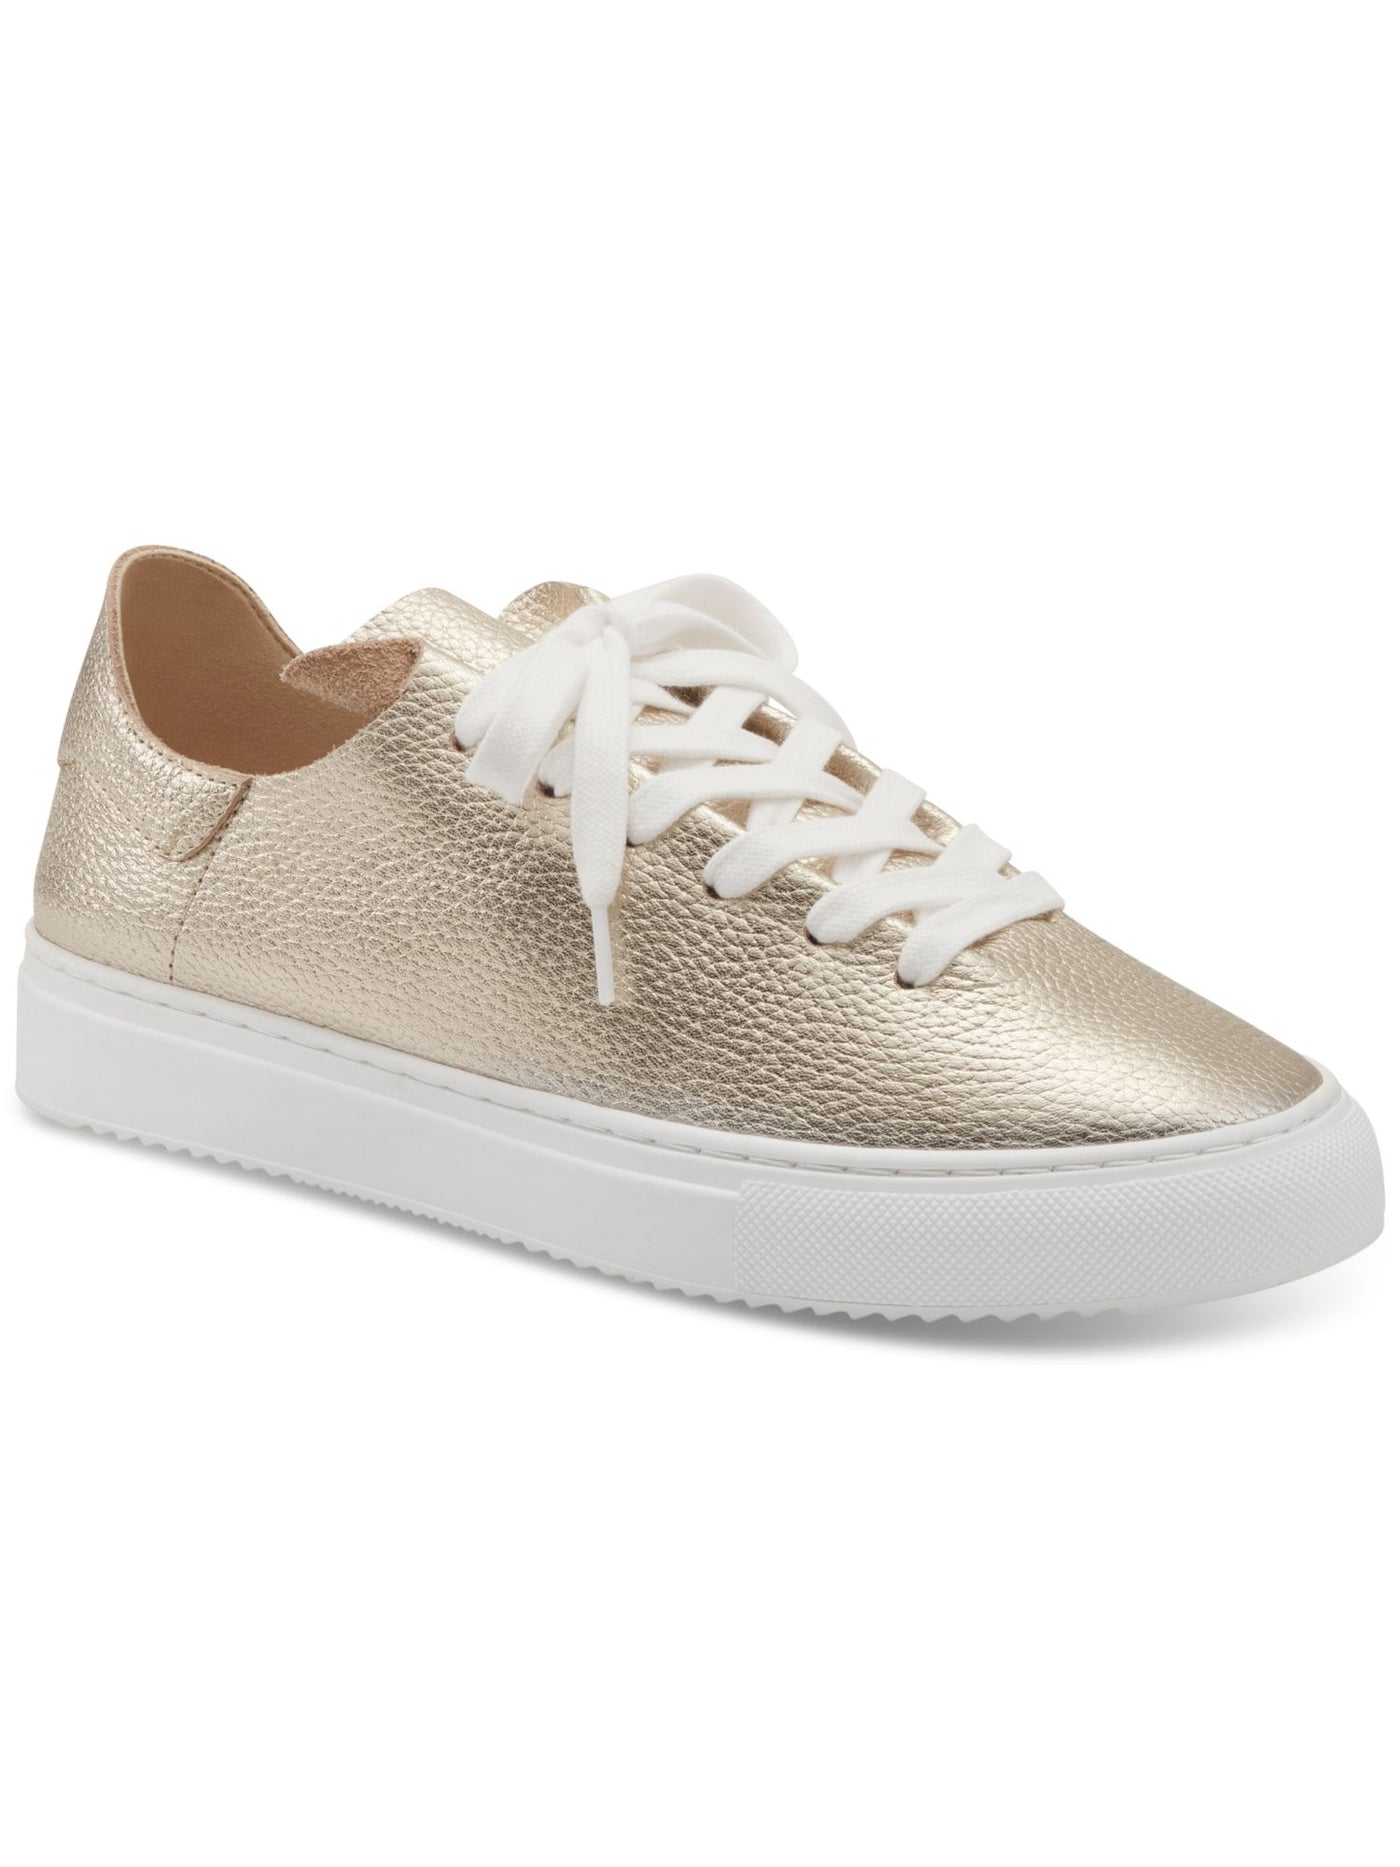 CHARTER CLUB Womens Gold Padded Padmaa Round Toe Lace-Up Leather Sneakers Shoes 6.5 M